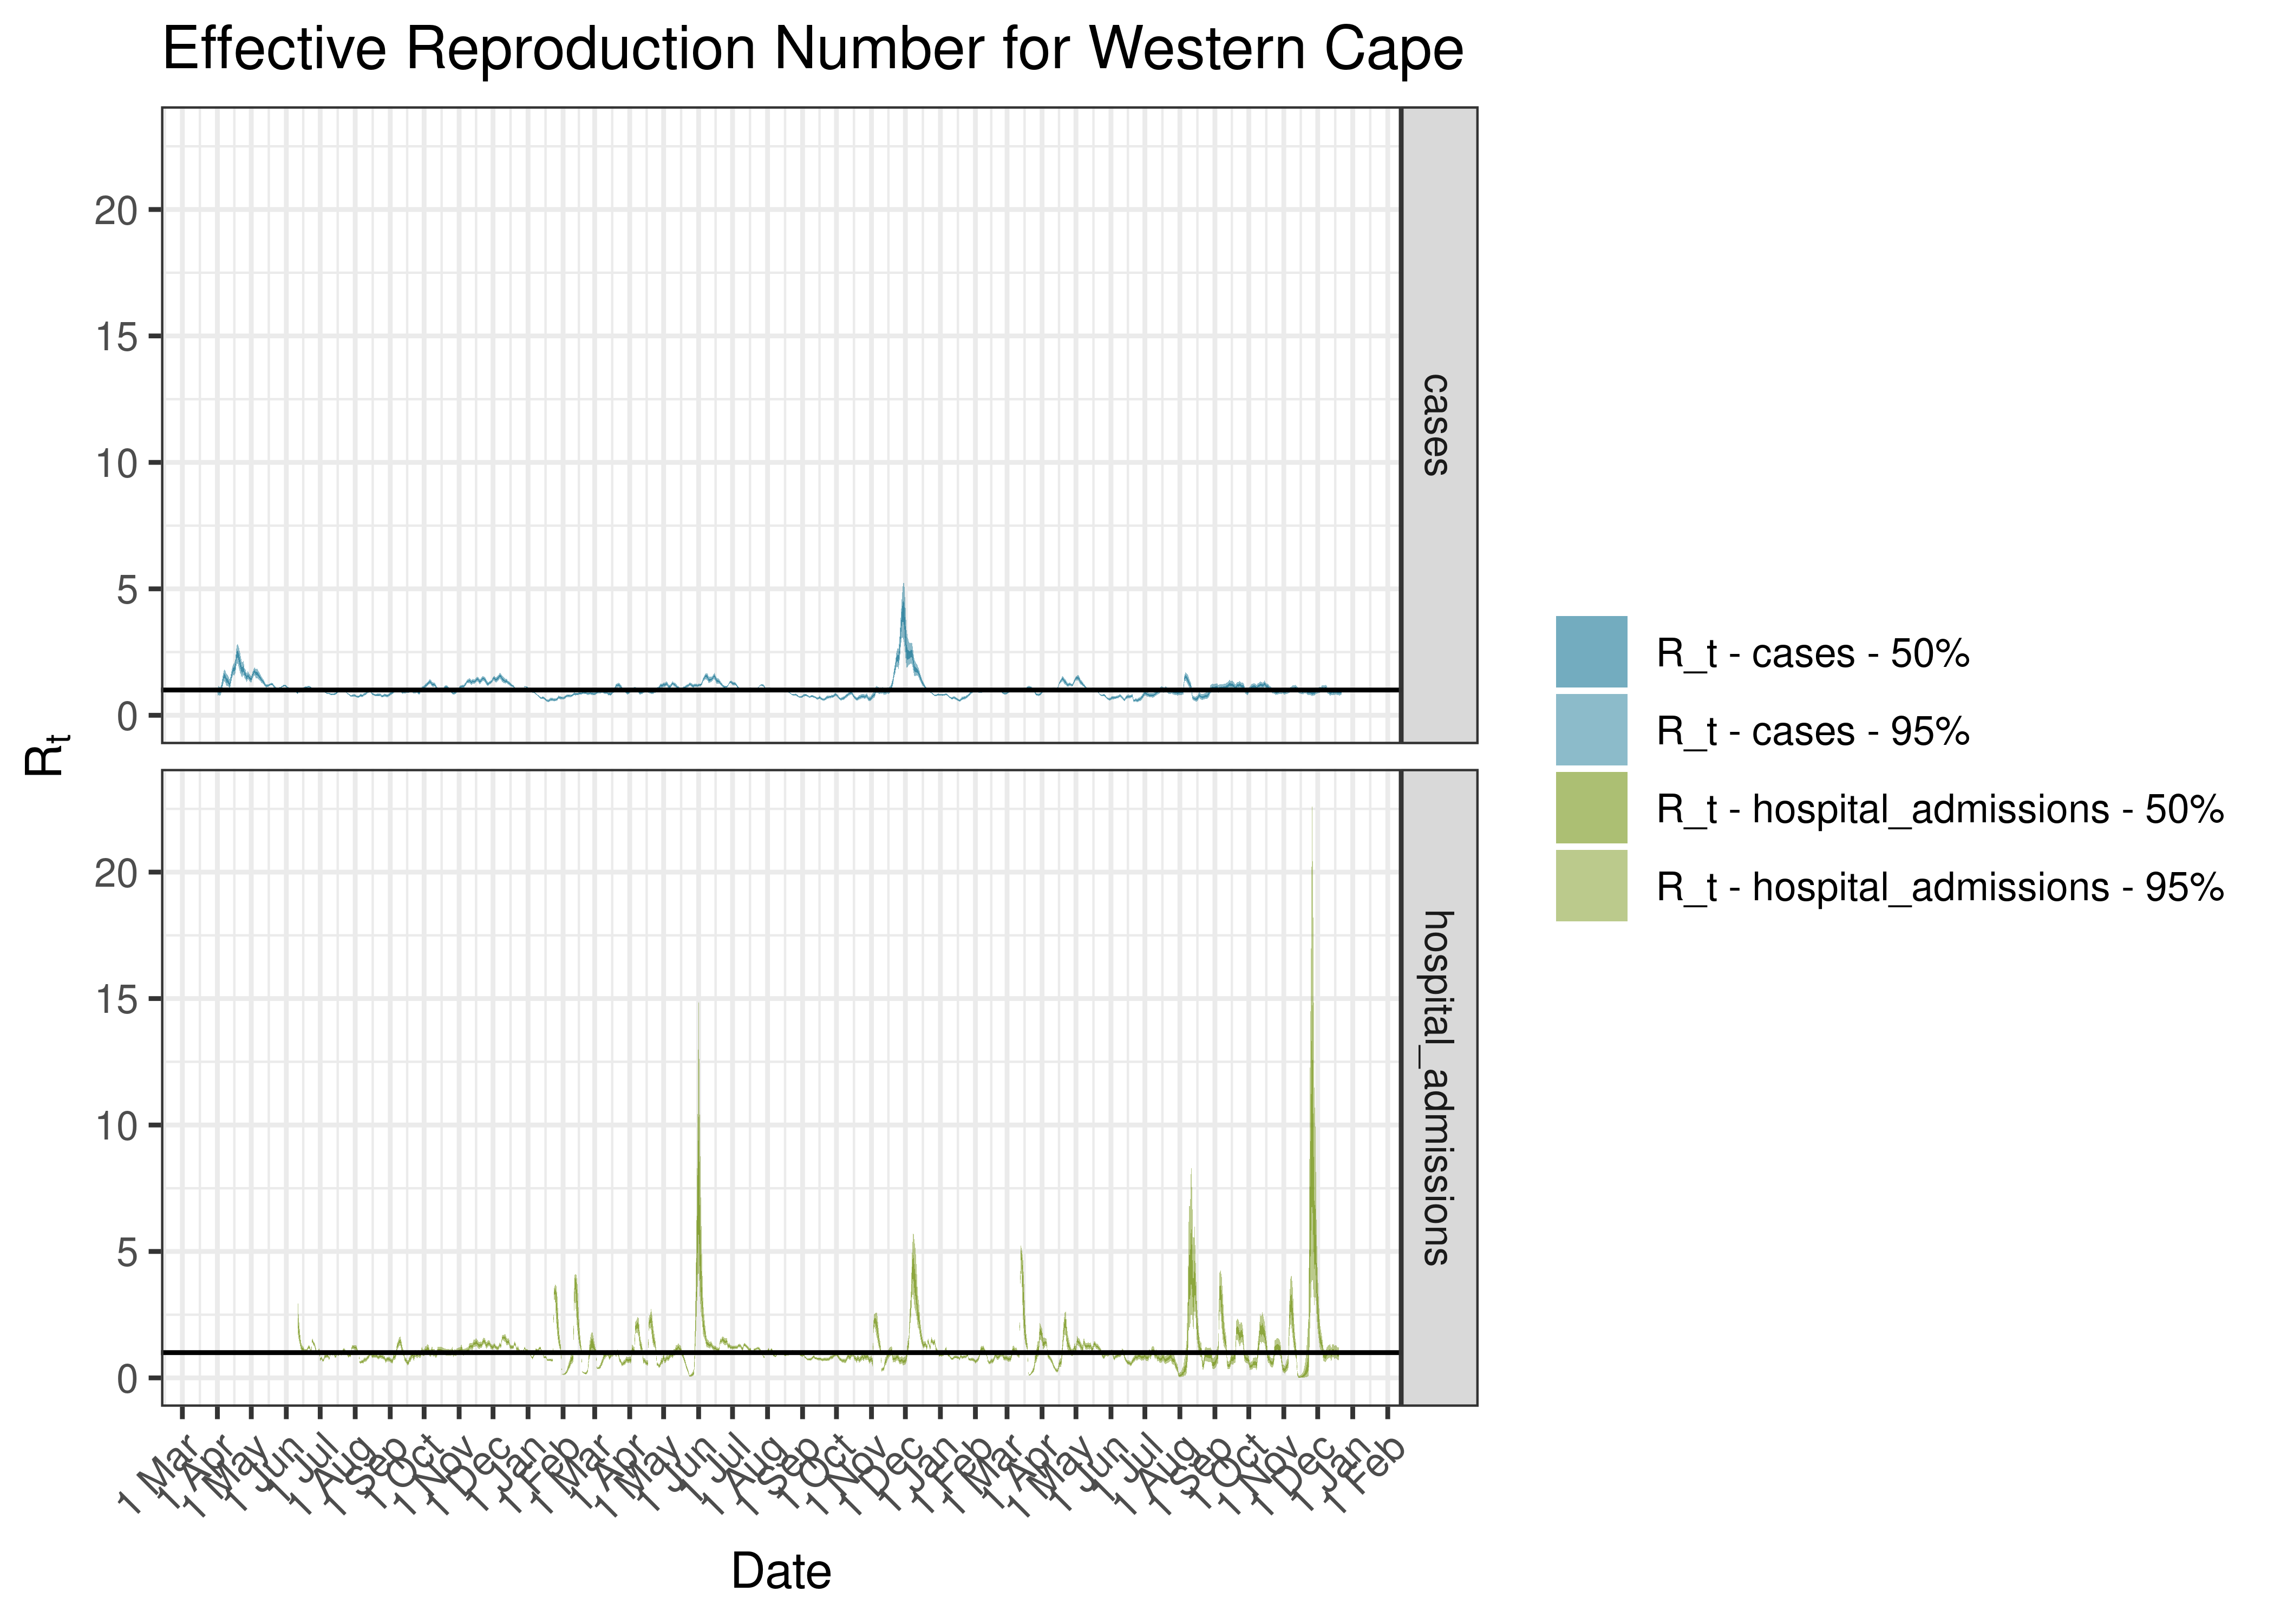 Estimated Effective Reproduction Number for Western Cape since 1 April 2020